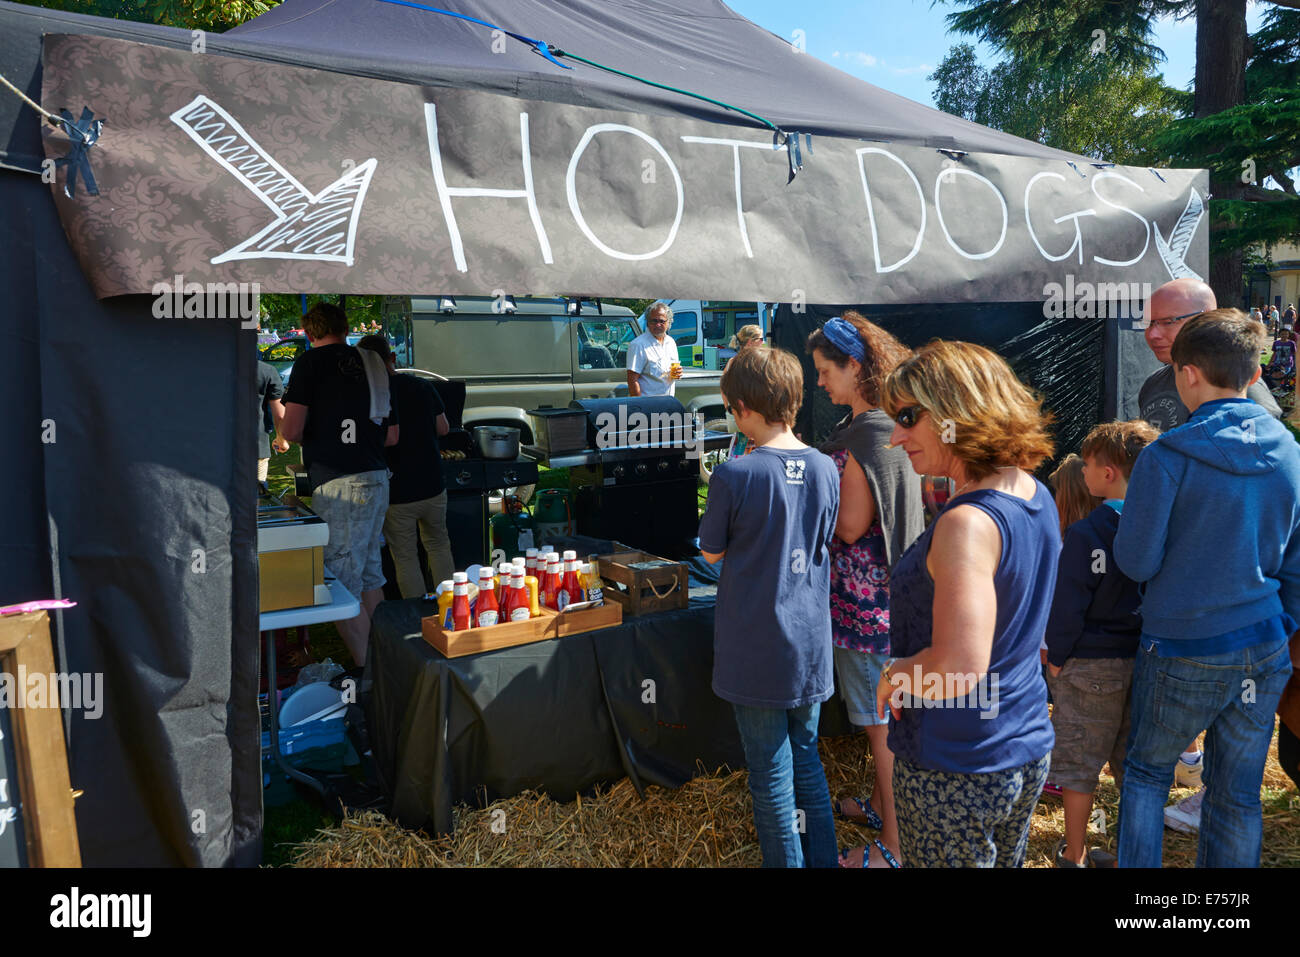 Hot Dogs Stall At The Food And Drink Festival Leamington Spa Warwickshire UK Stock Photo